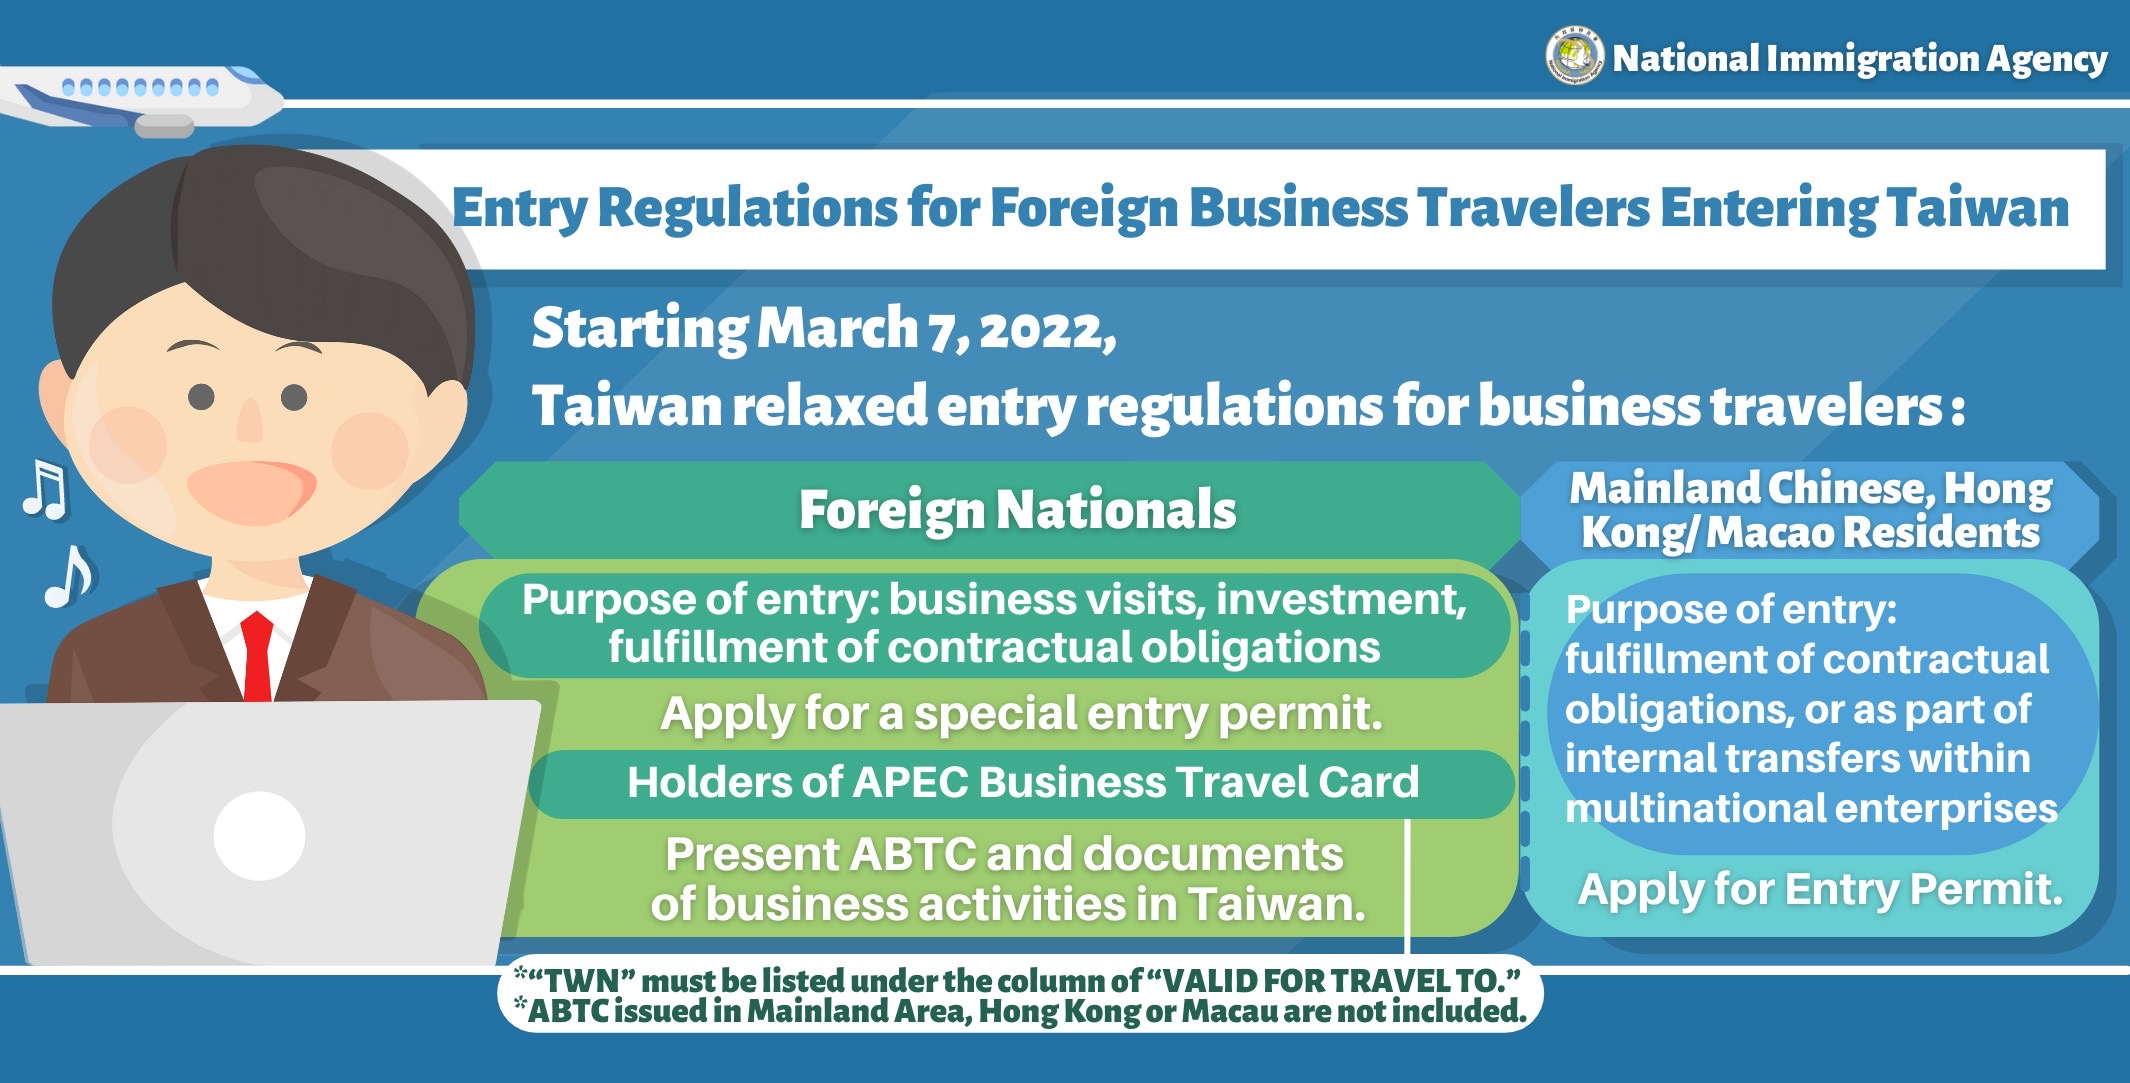 Entry Regulations for Foreign Business Travelers Entering Taiwan